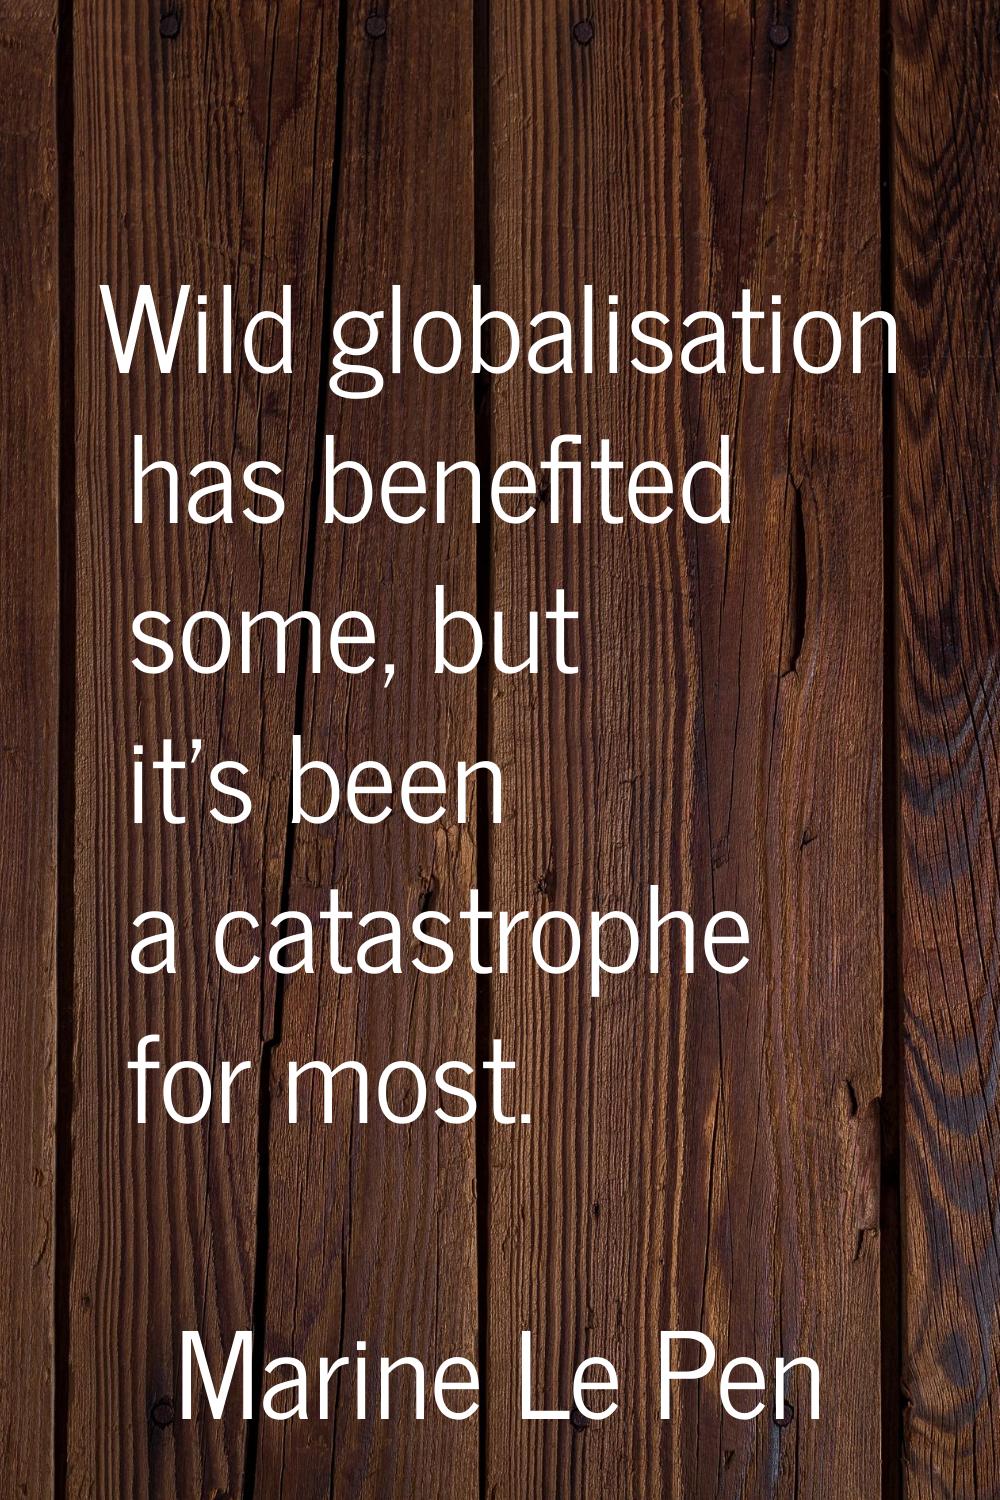 Wild globalisation has benefited some, but it's been a catastrophe for most.